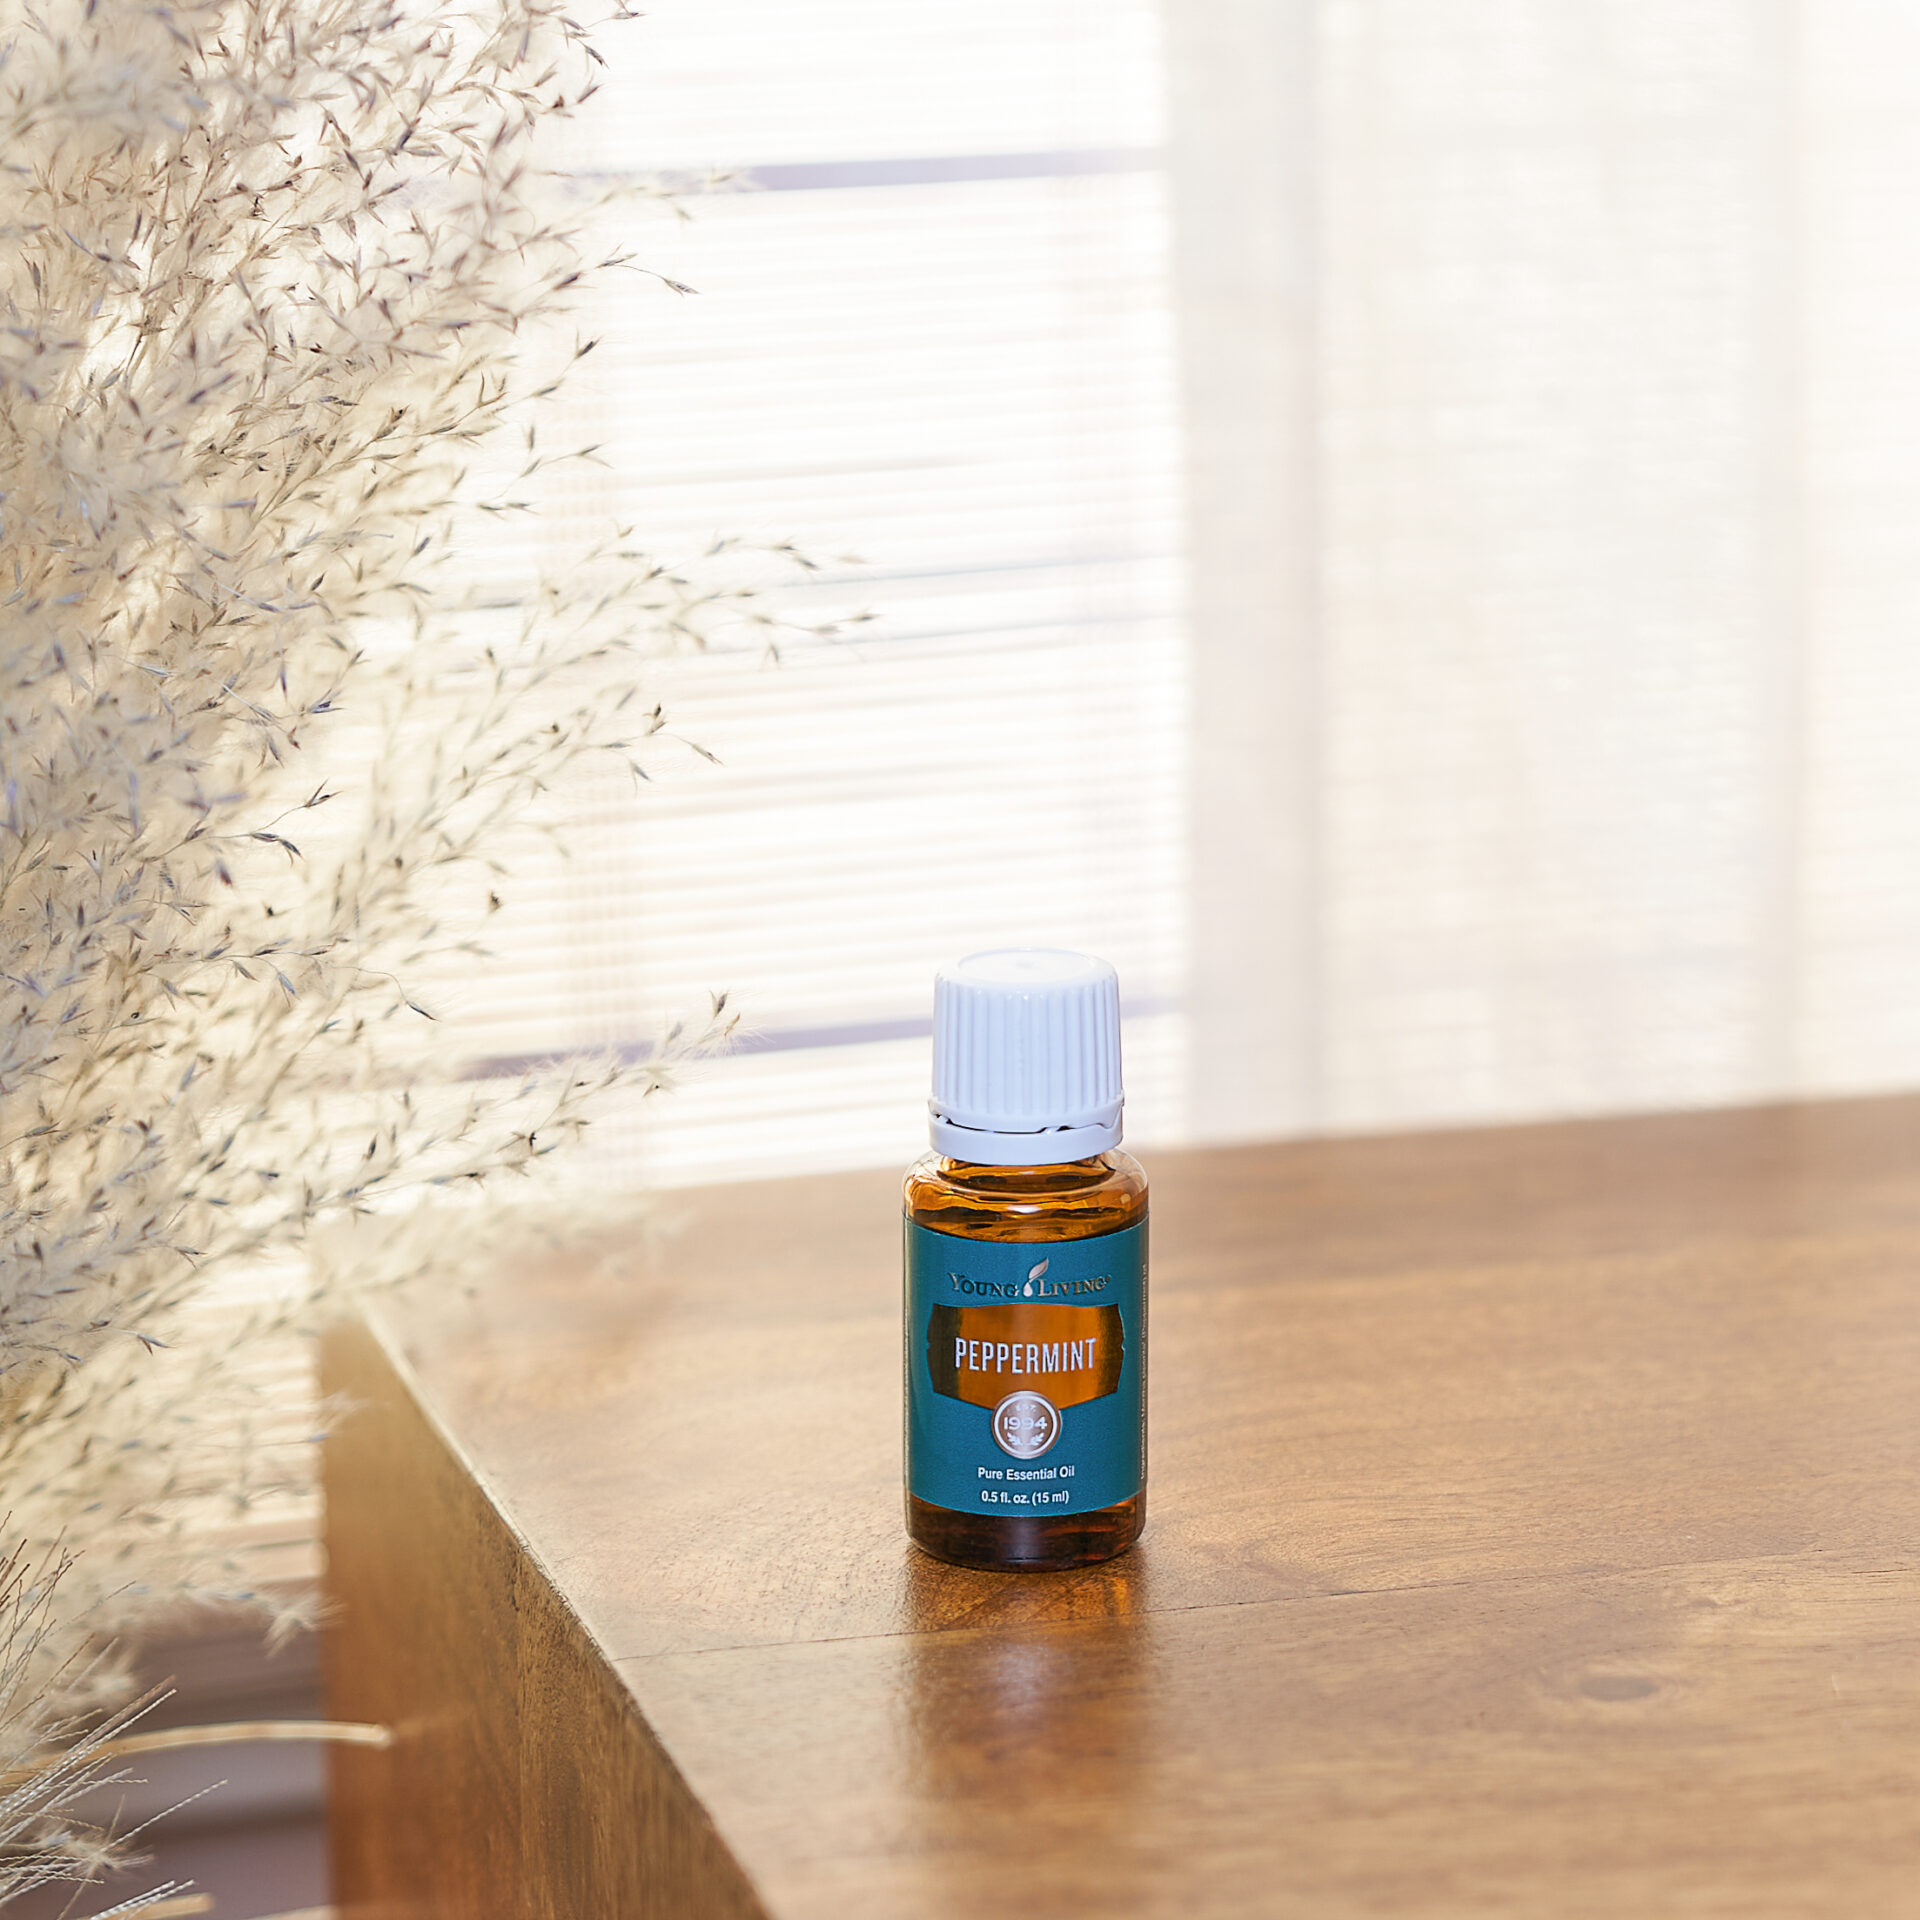 Peppermint Essential Oil - Young Living Essential Oils 